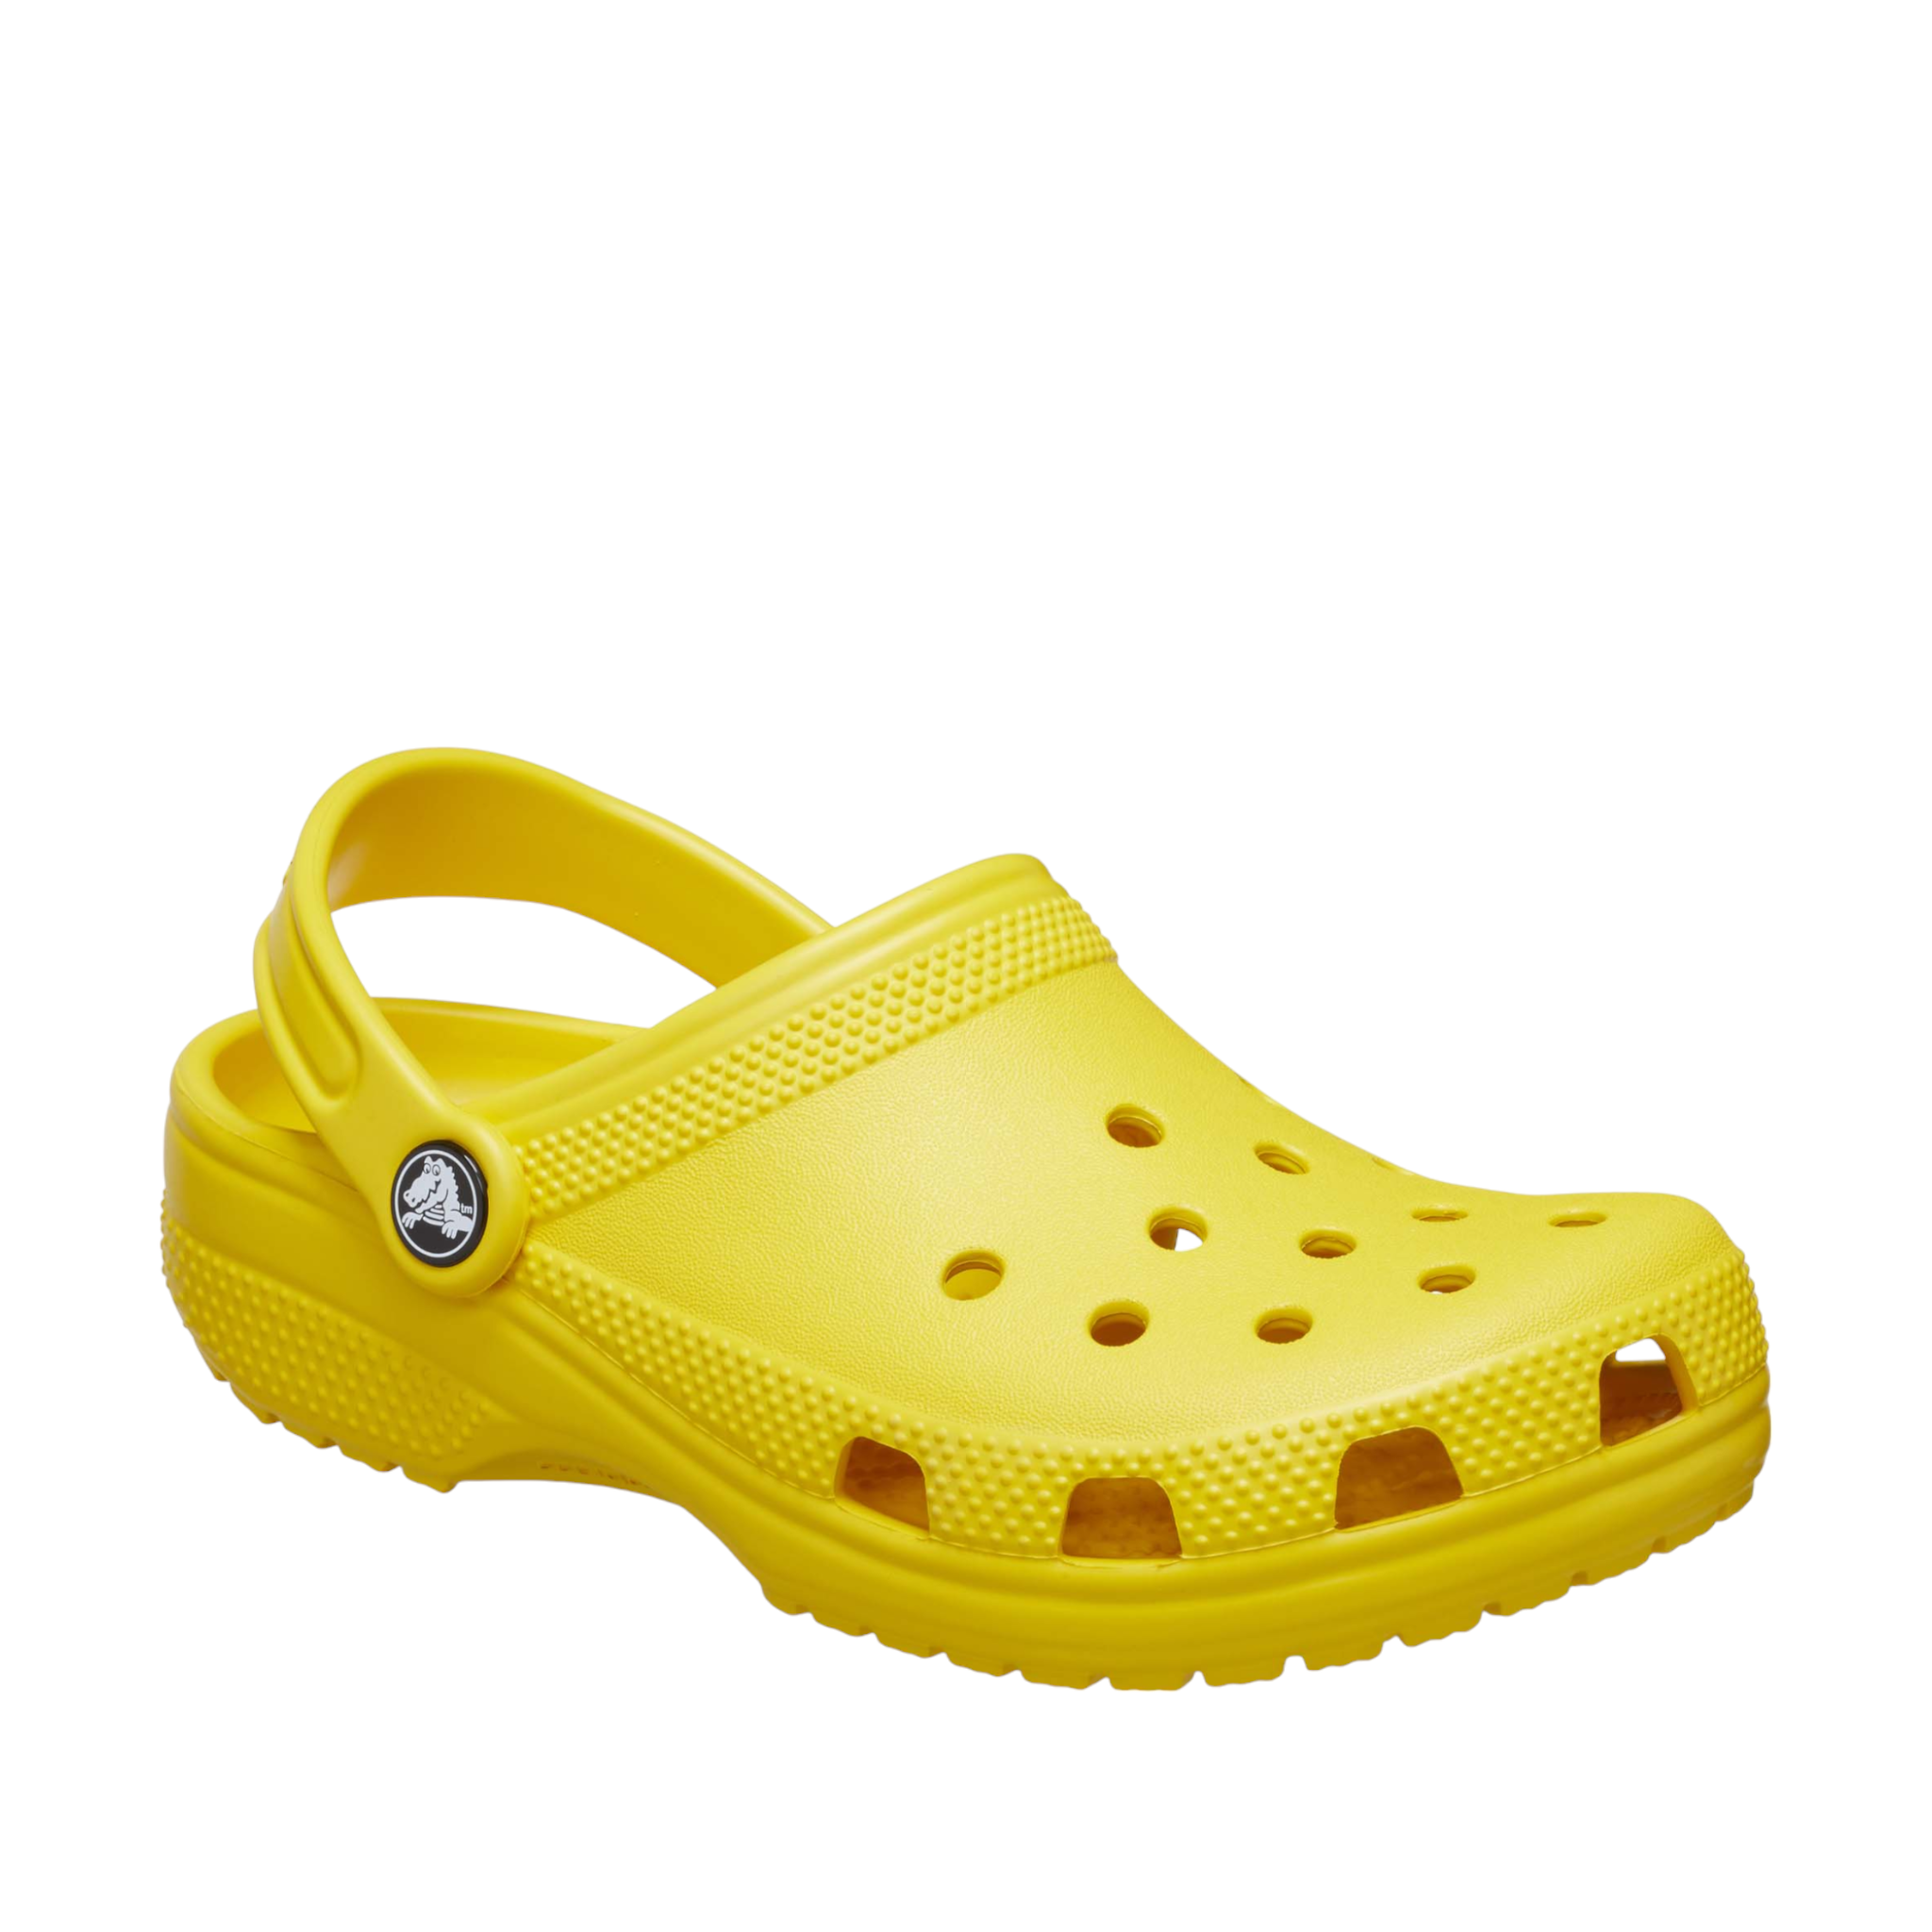 Crocs Classic Clogs online and instore with shoe&amp;me Mount Maunganui. Shop sunflower Clogs